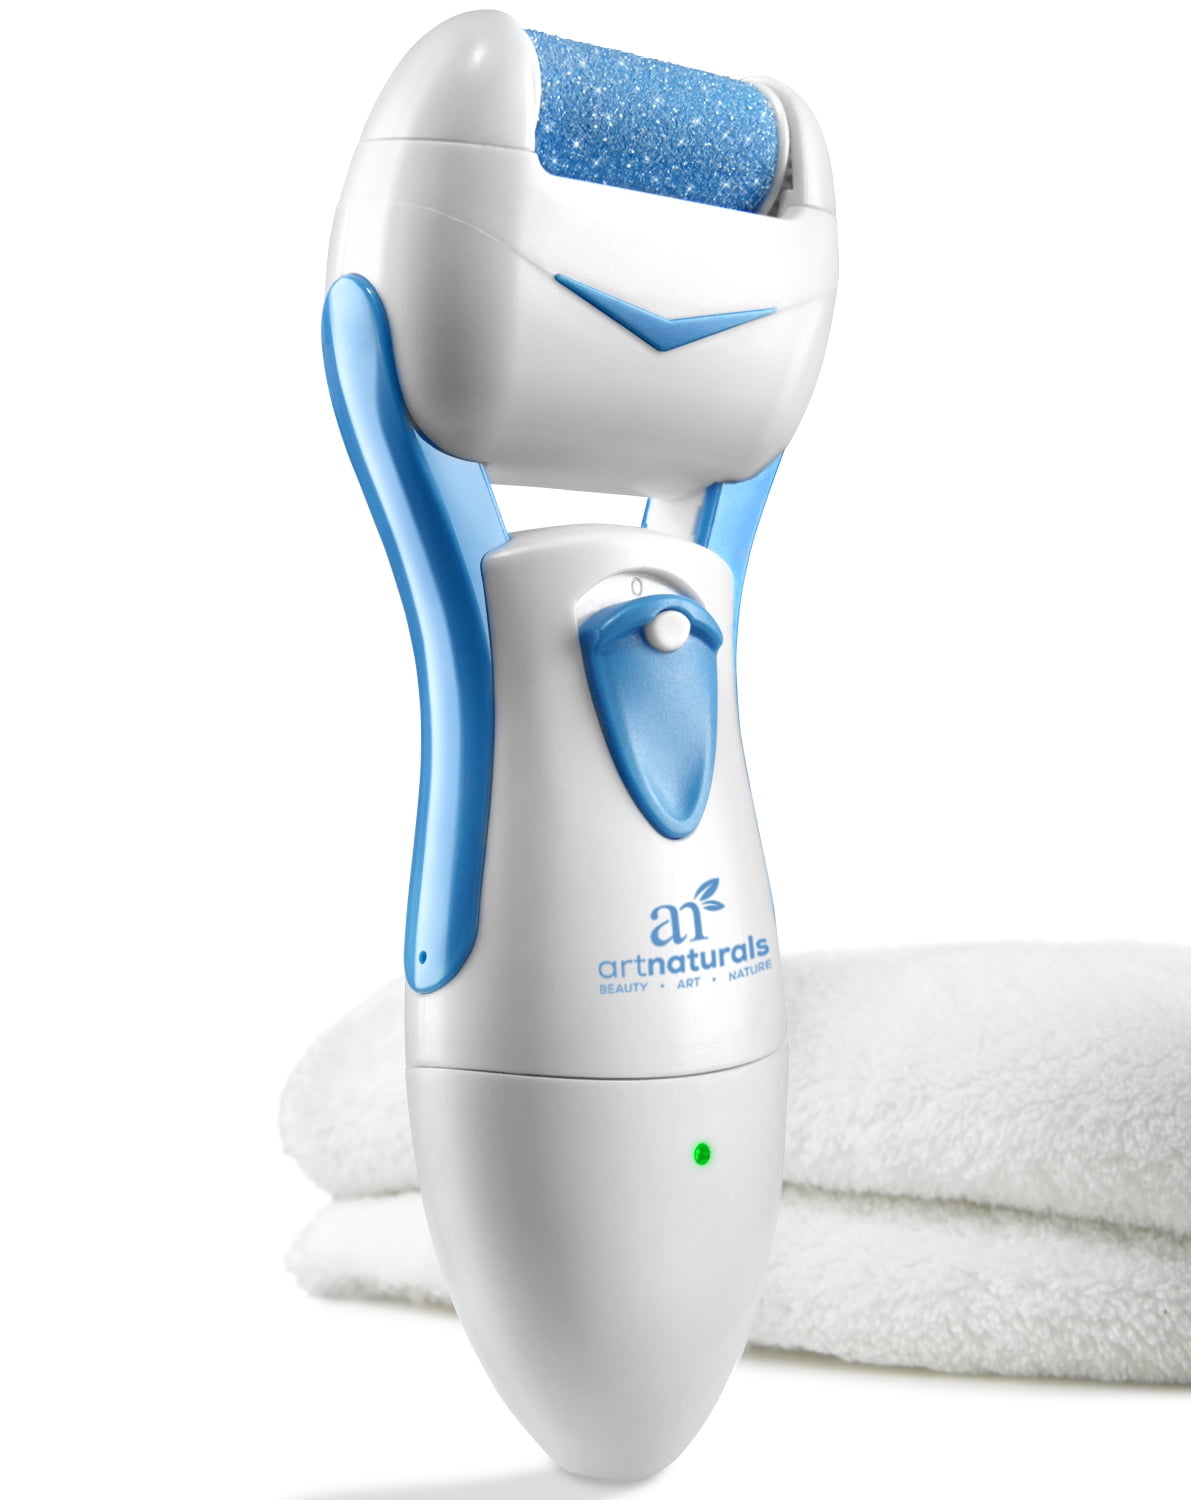  Nuve Smooth Pedicure Wand, Electric Callus Remover